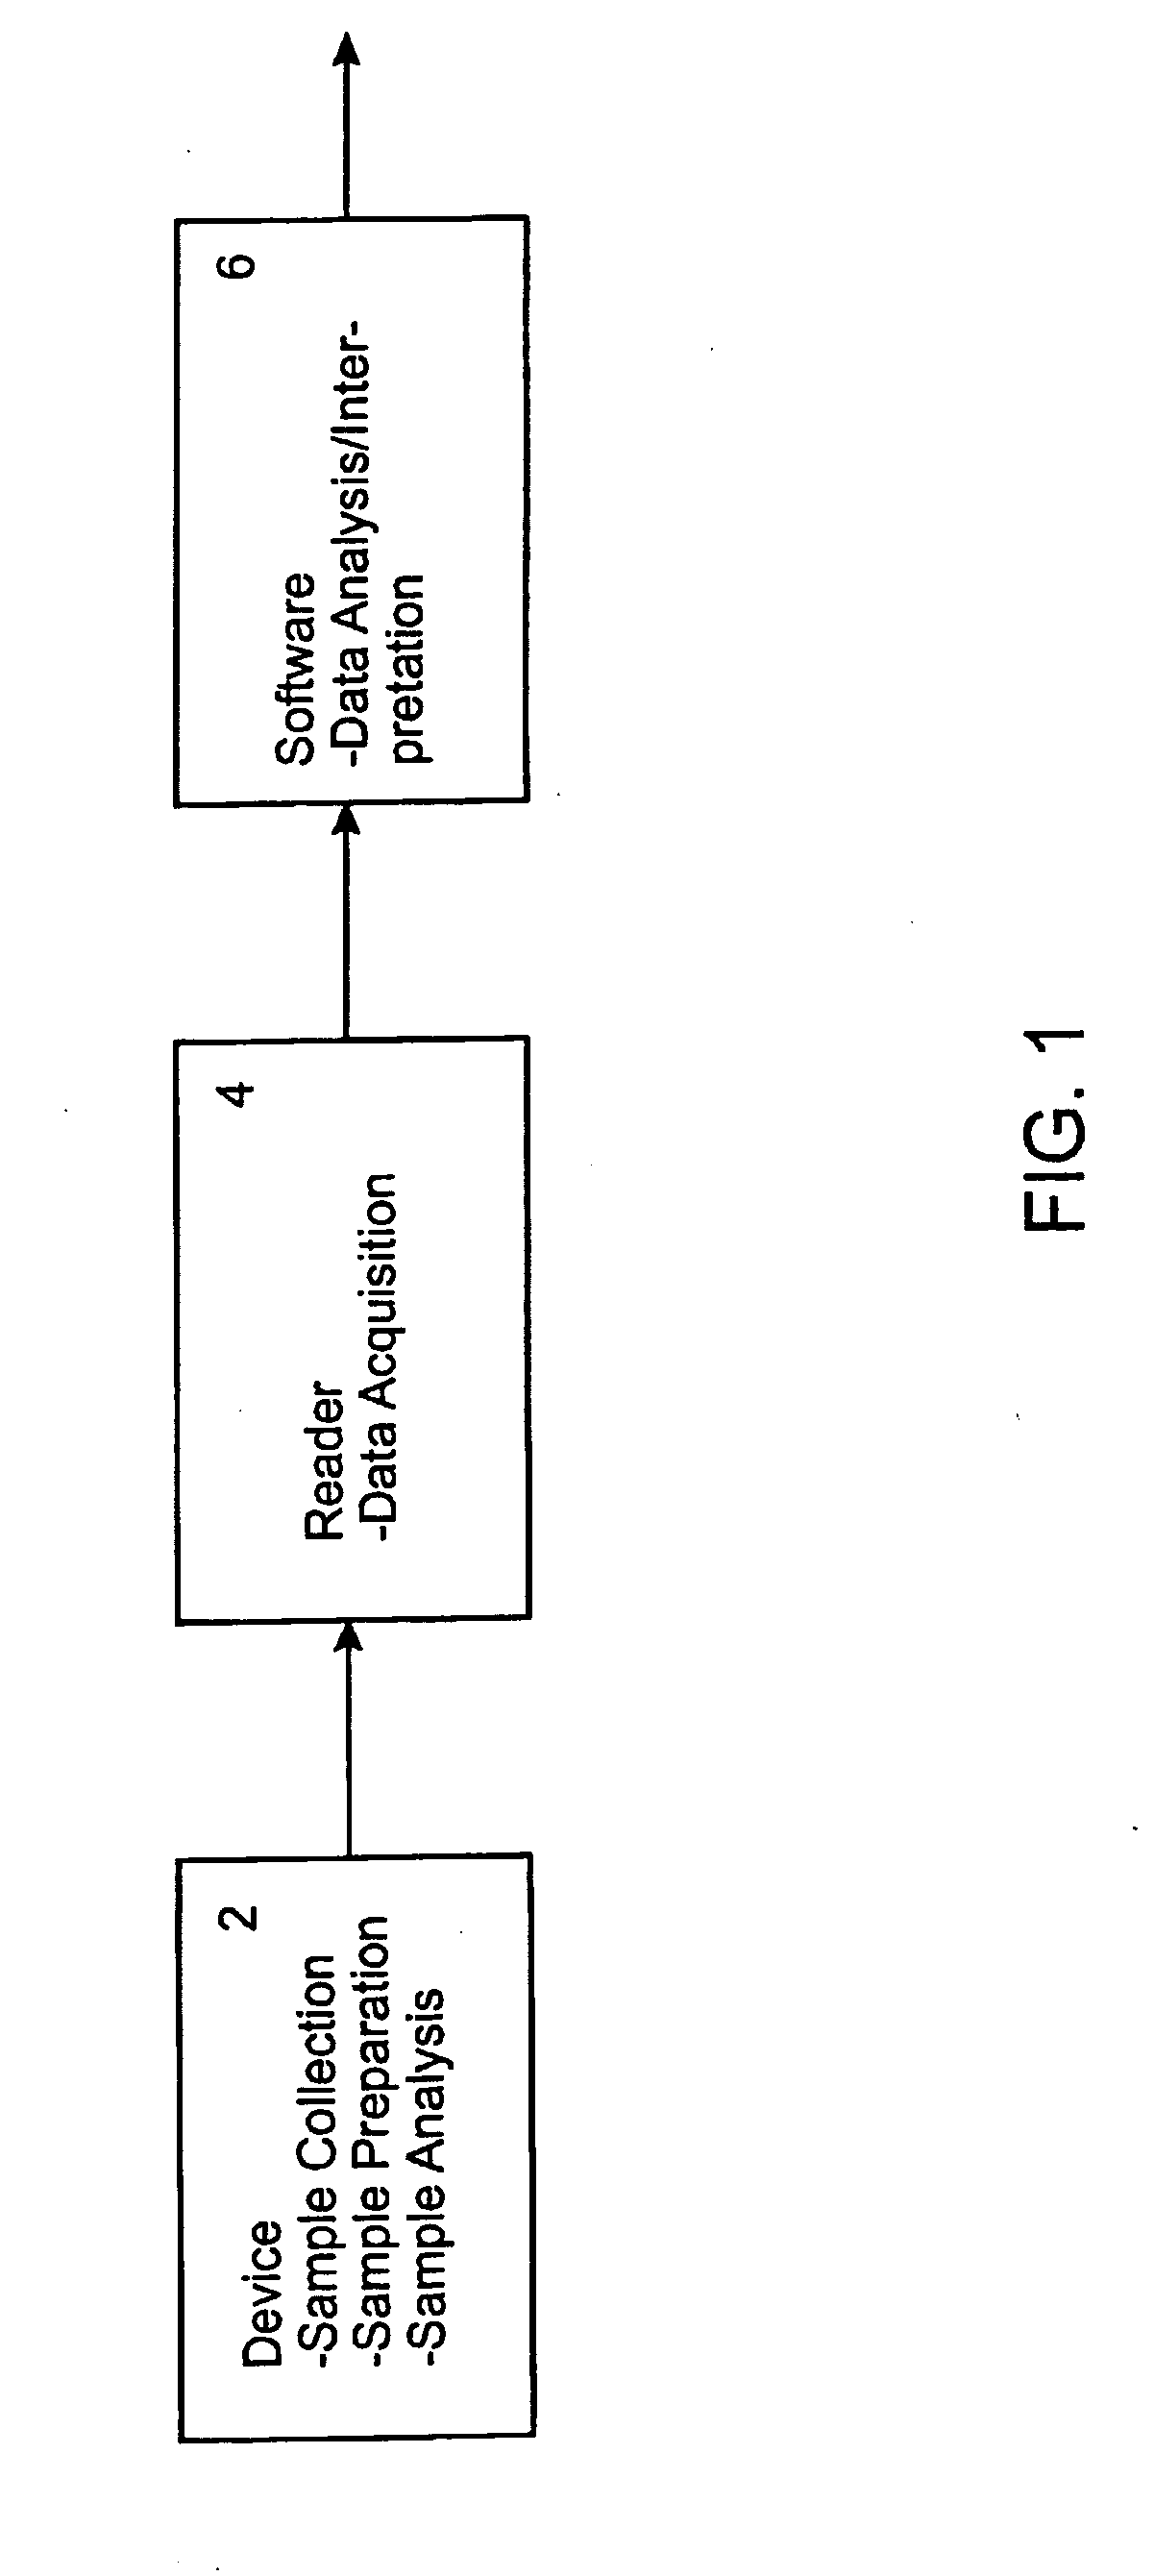 Miniaturized genetic analysis systems and methods